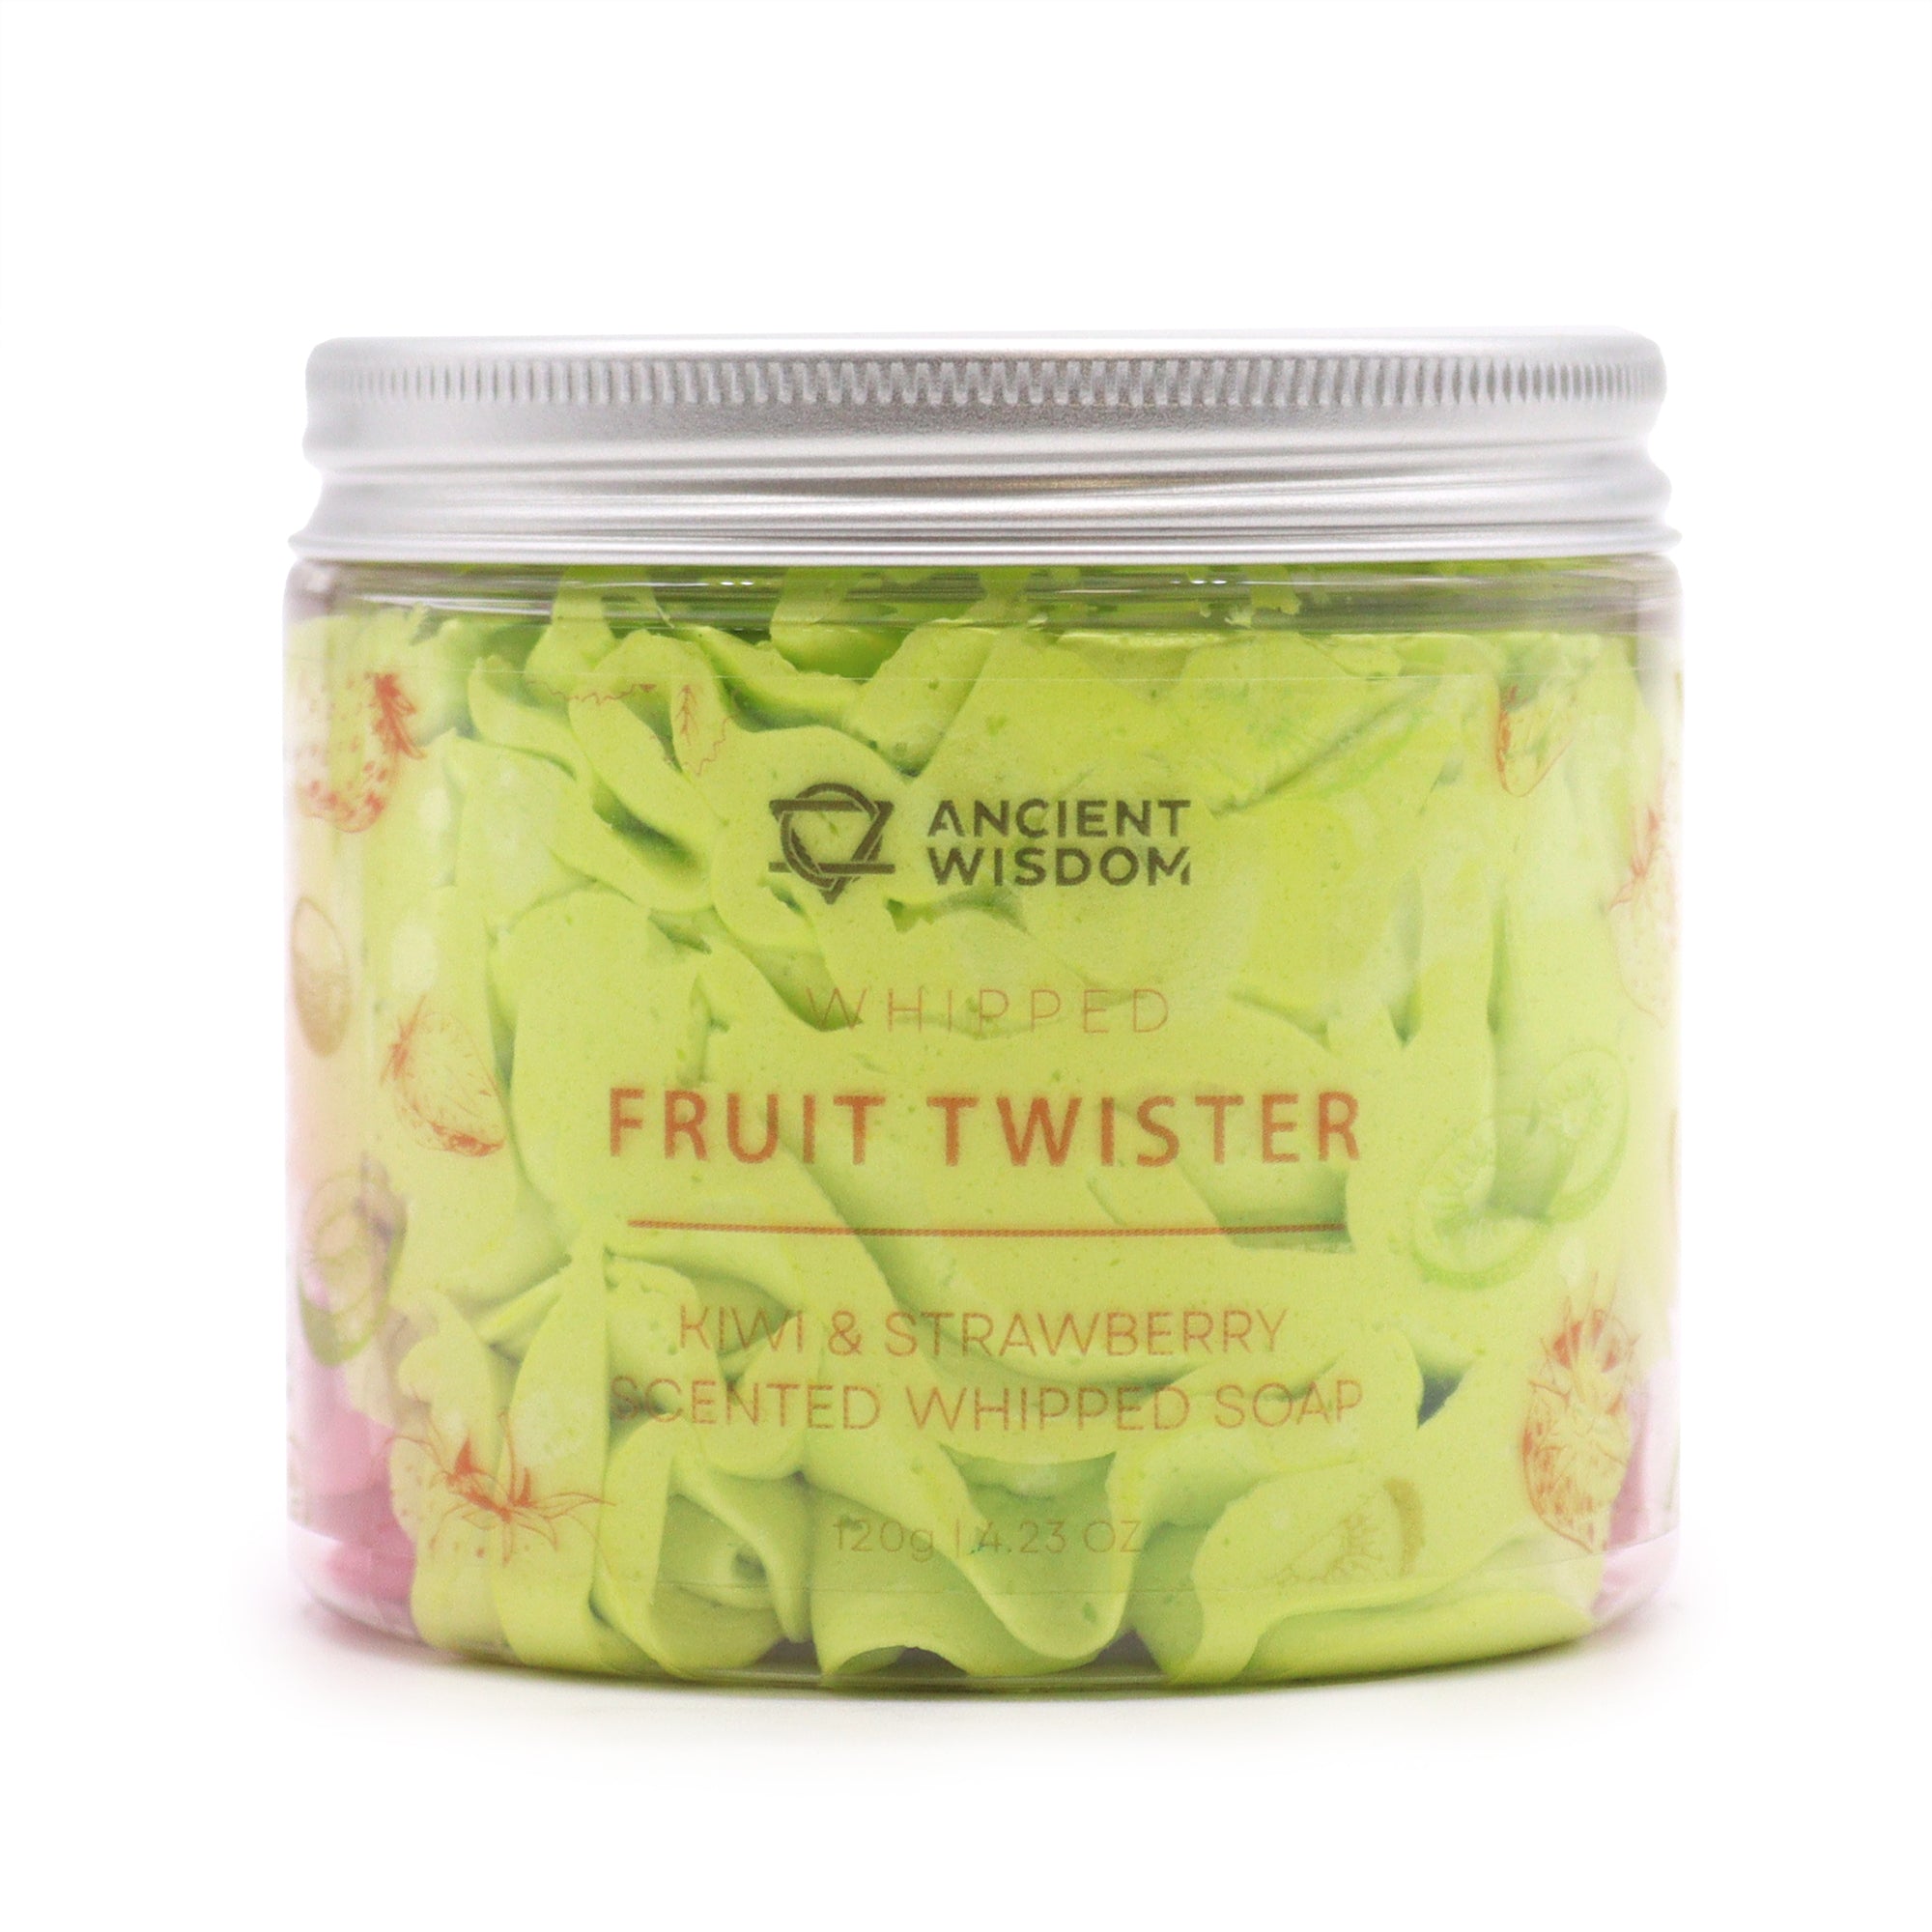 View Strawberry Kiwi Whipped Cream Soap 120g information